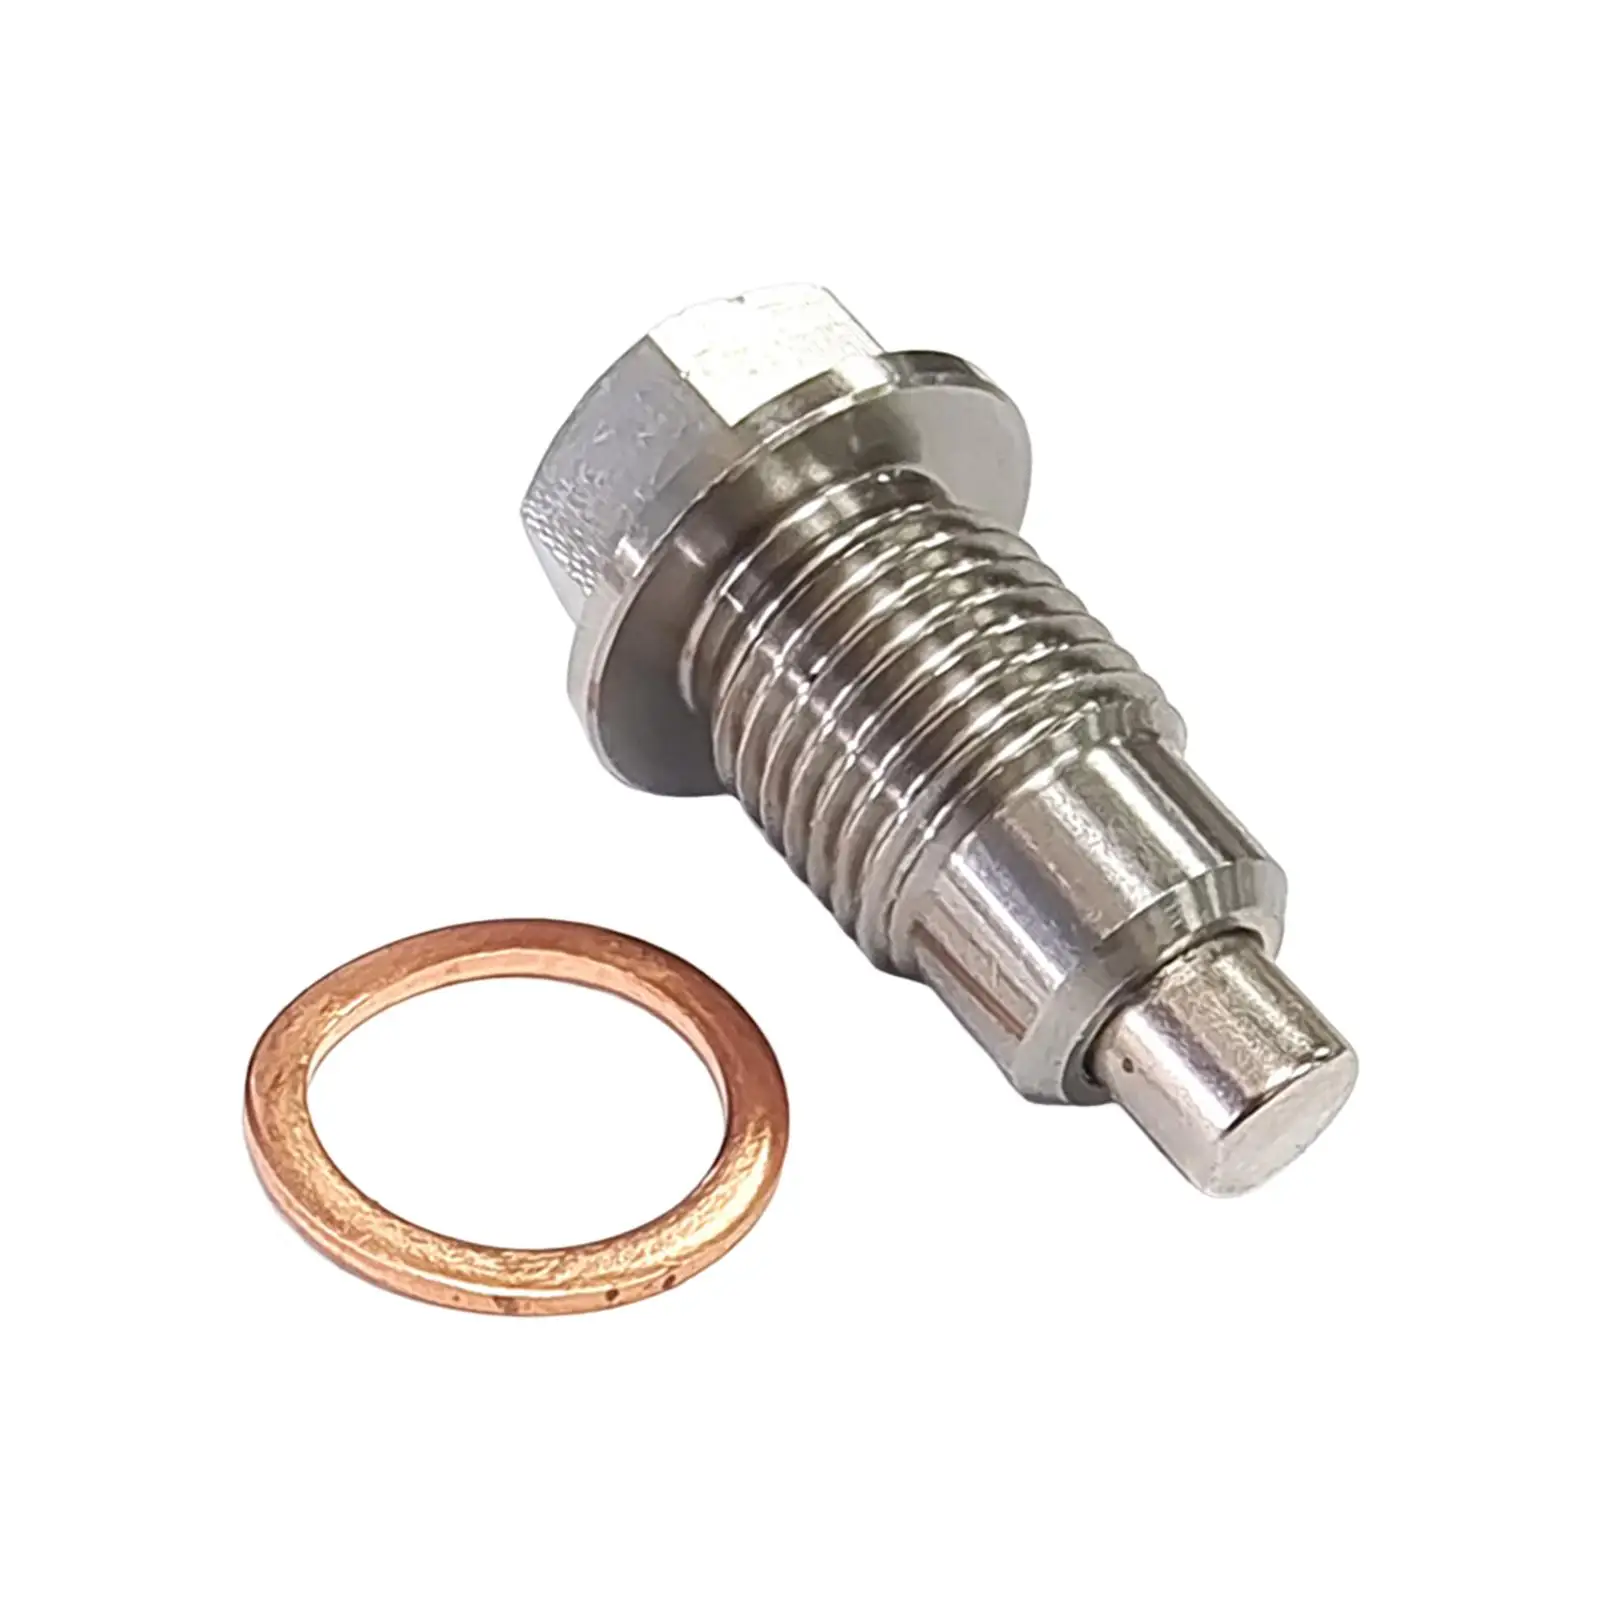 Oil Drain Plug Screw M12x1.25 with Cooper Washer Install Faster Replace